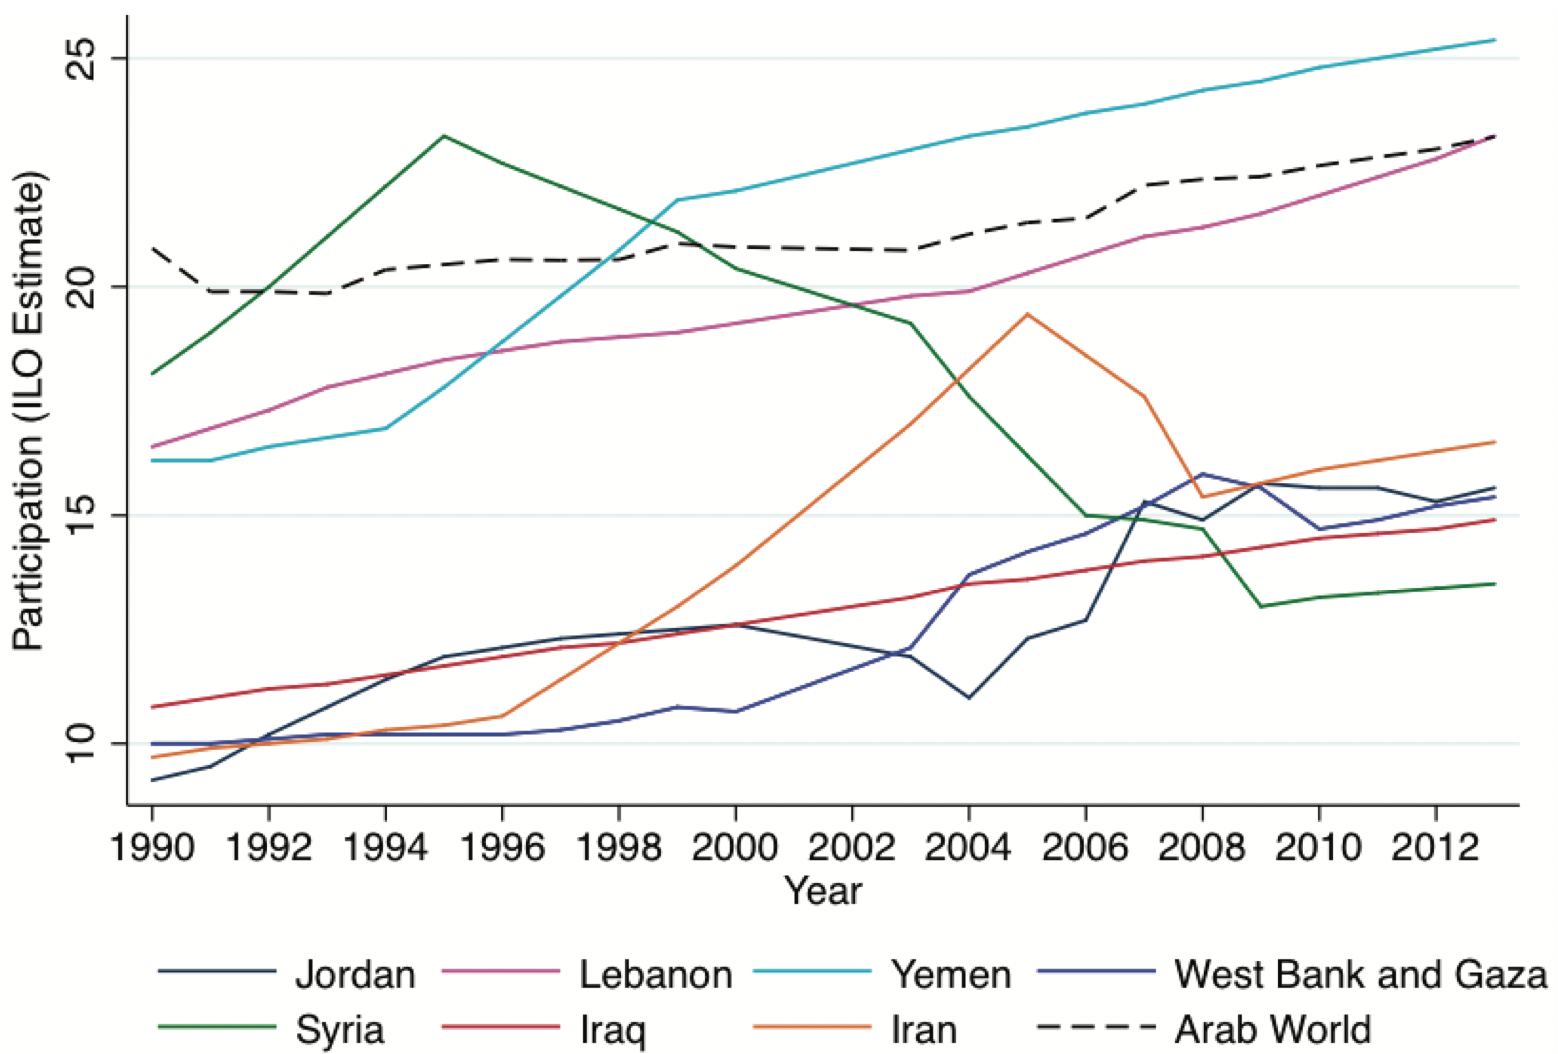 This graph compares female labor force participation in the rest of the Middle East over time.